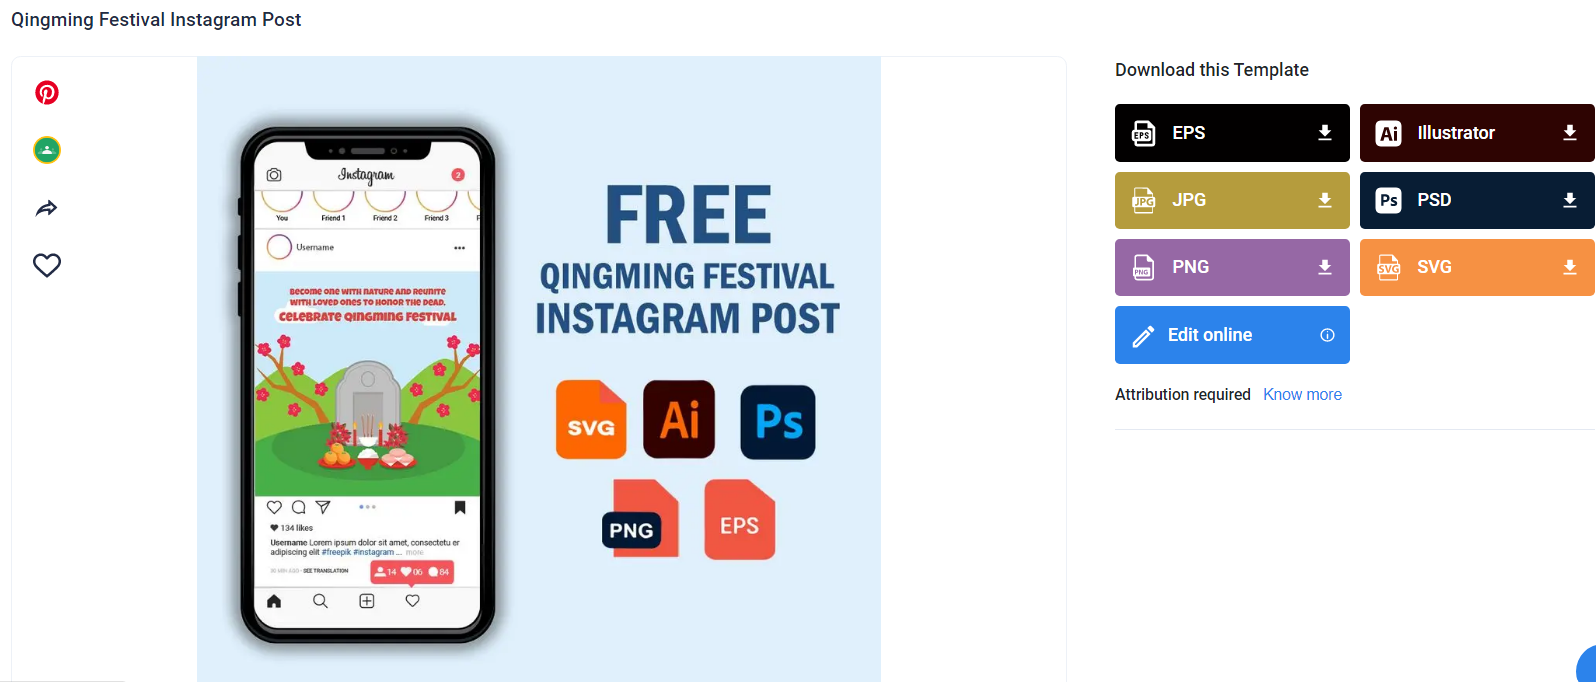 select a qingming festival instagram post template